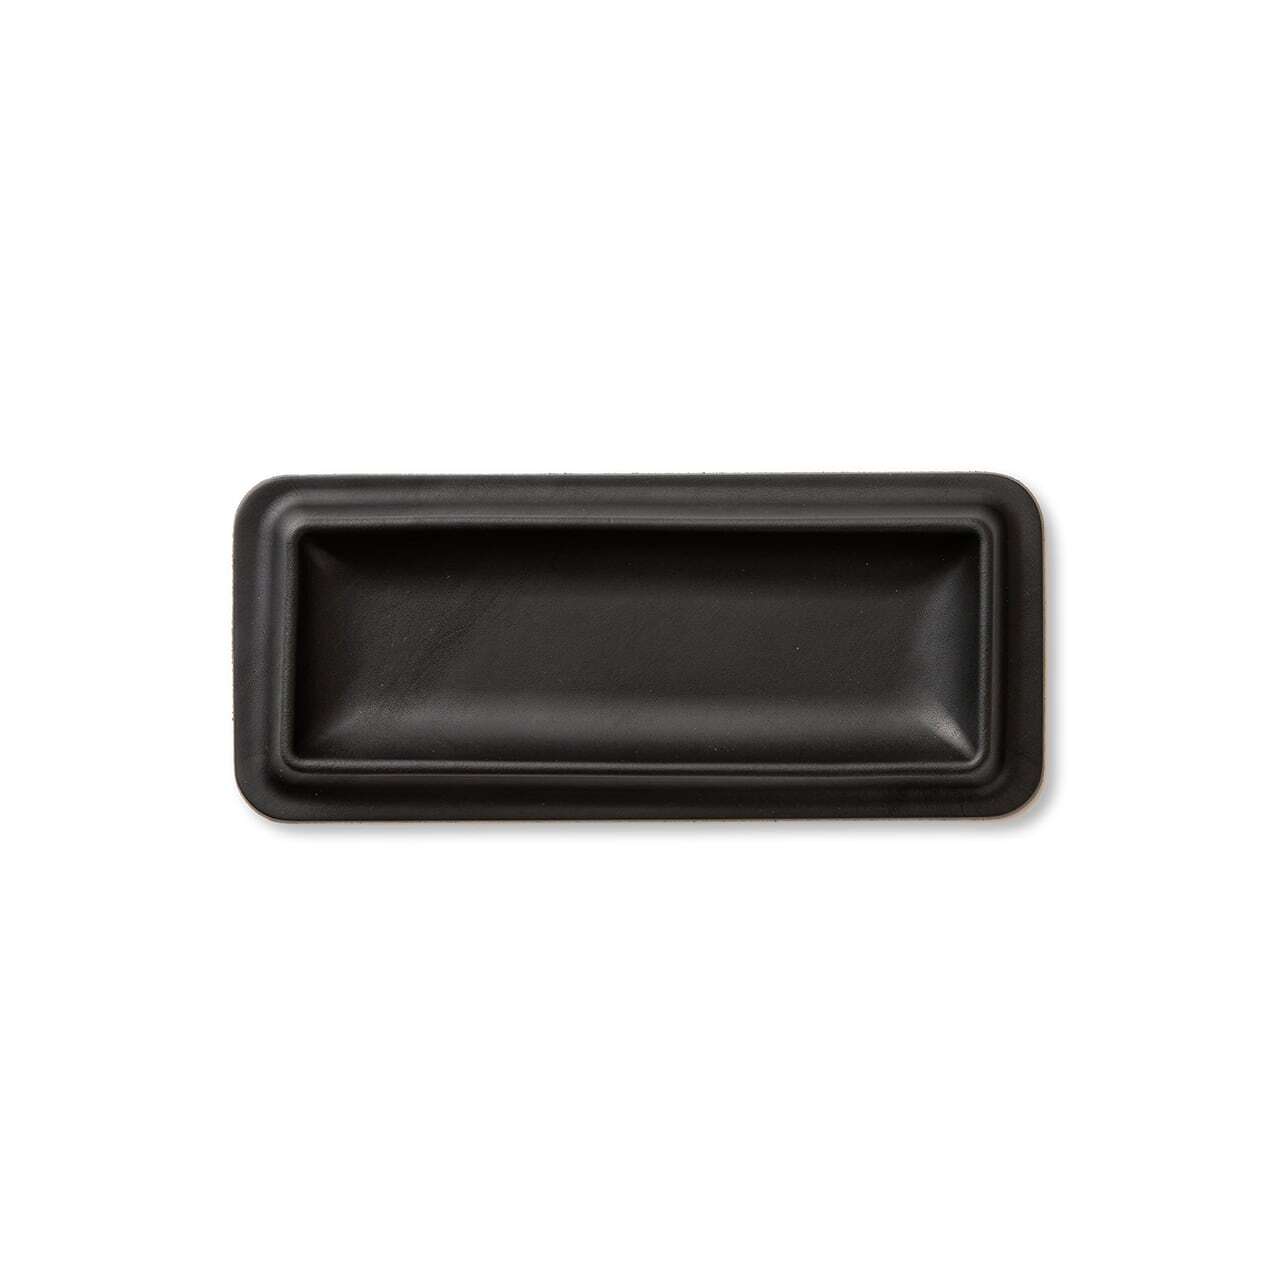 【colm/コルム】Leather Tray M (Black) 590Co.